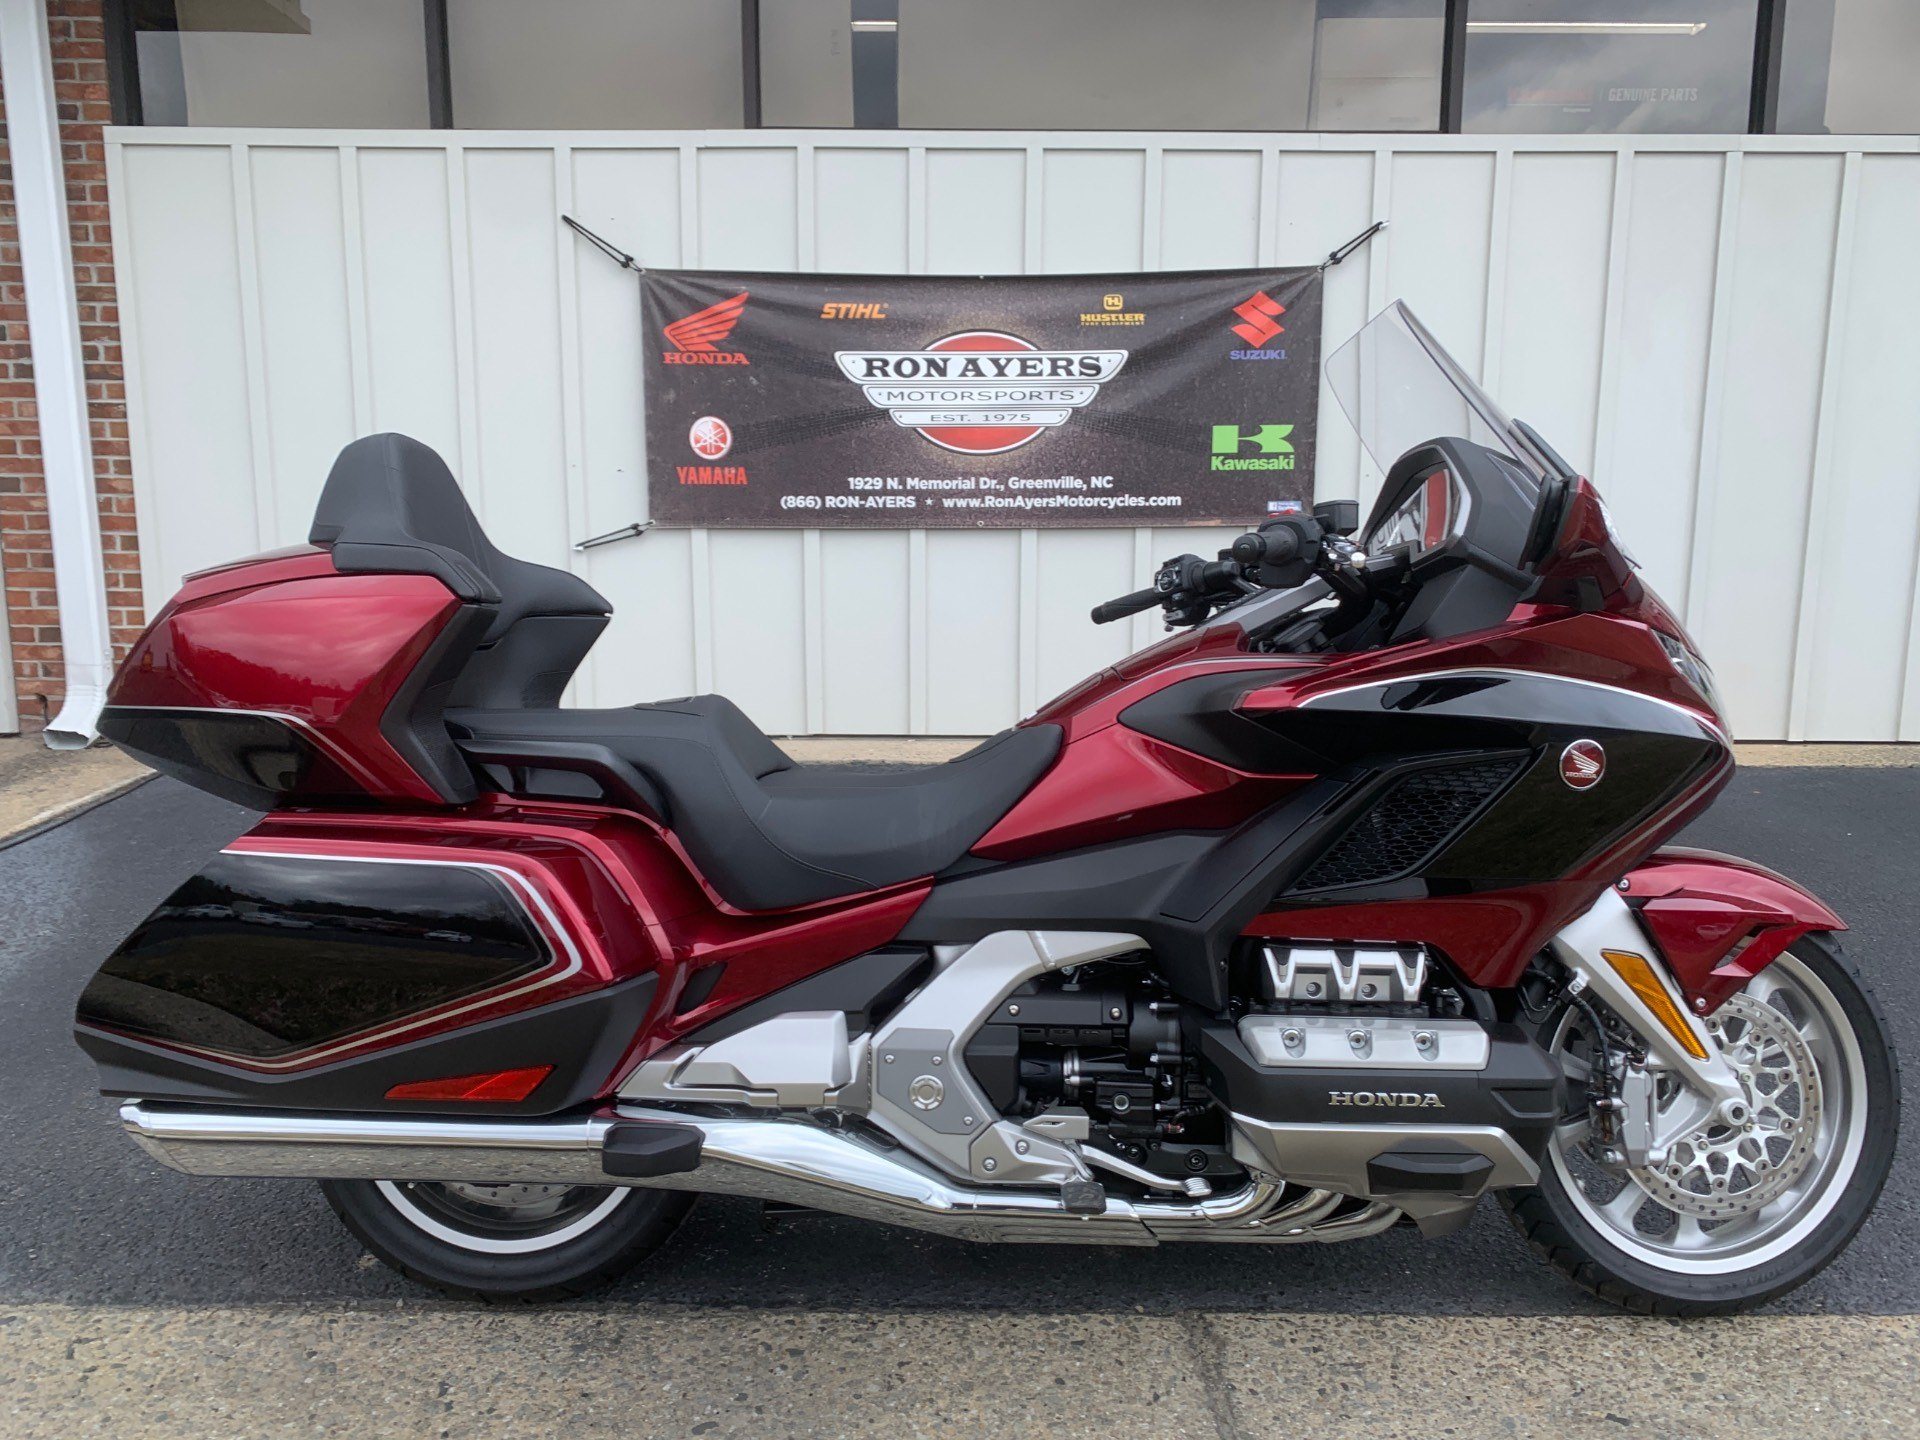 New 2020 Honda Gold Wing Tour Motorcycles In Greenville Nc Stock Number N A